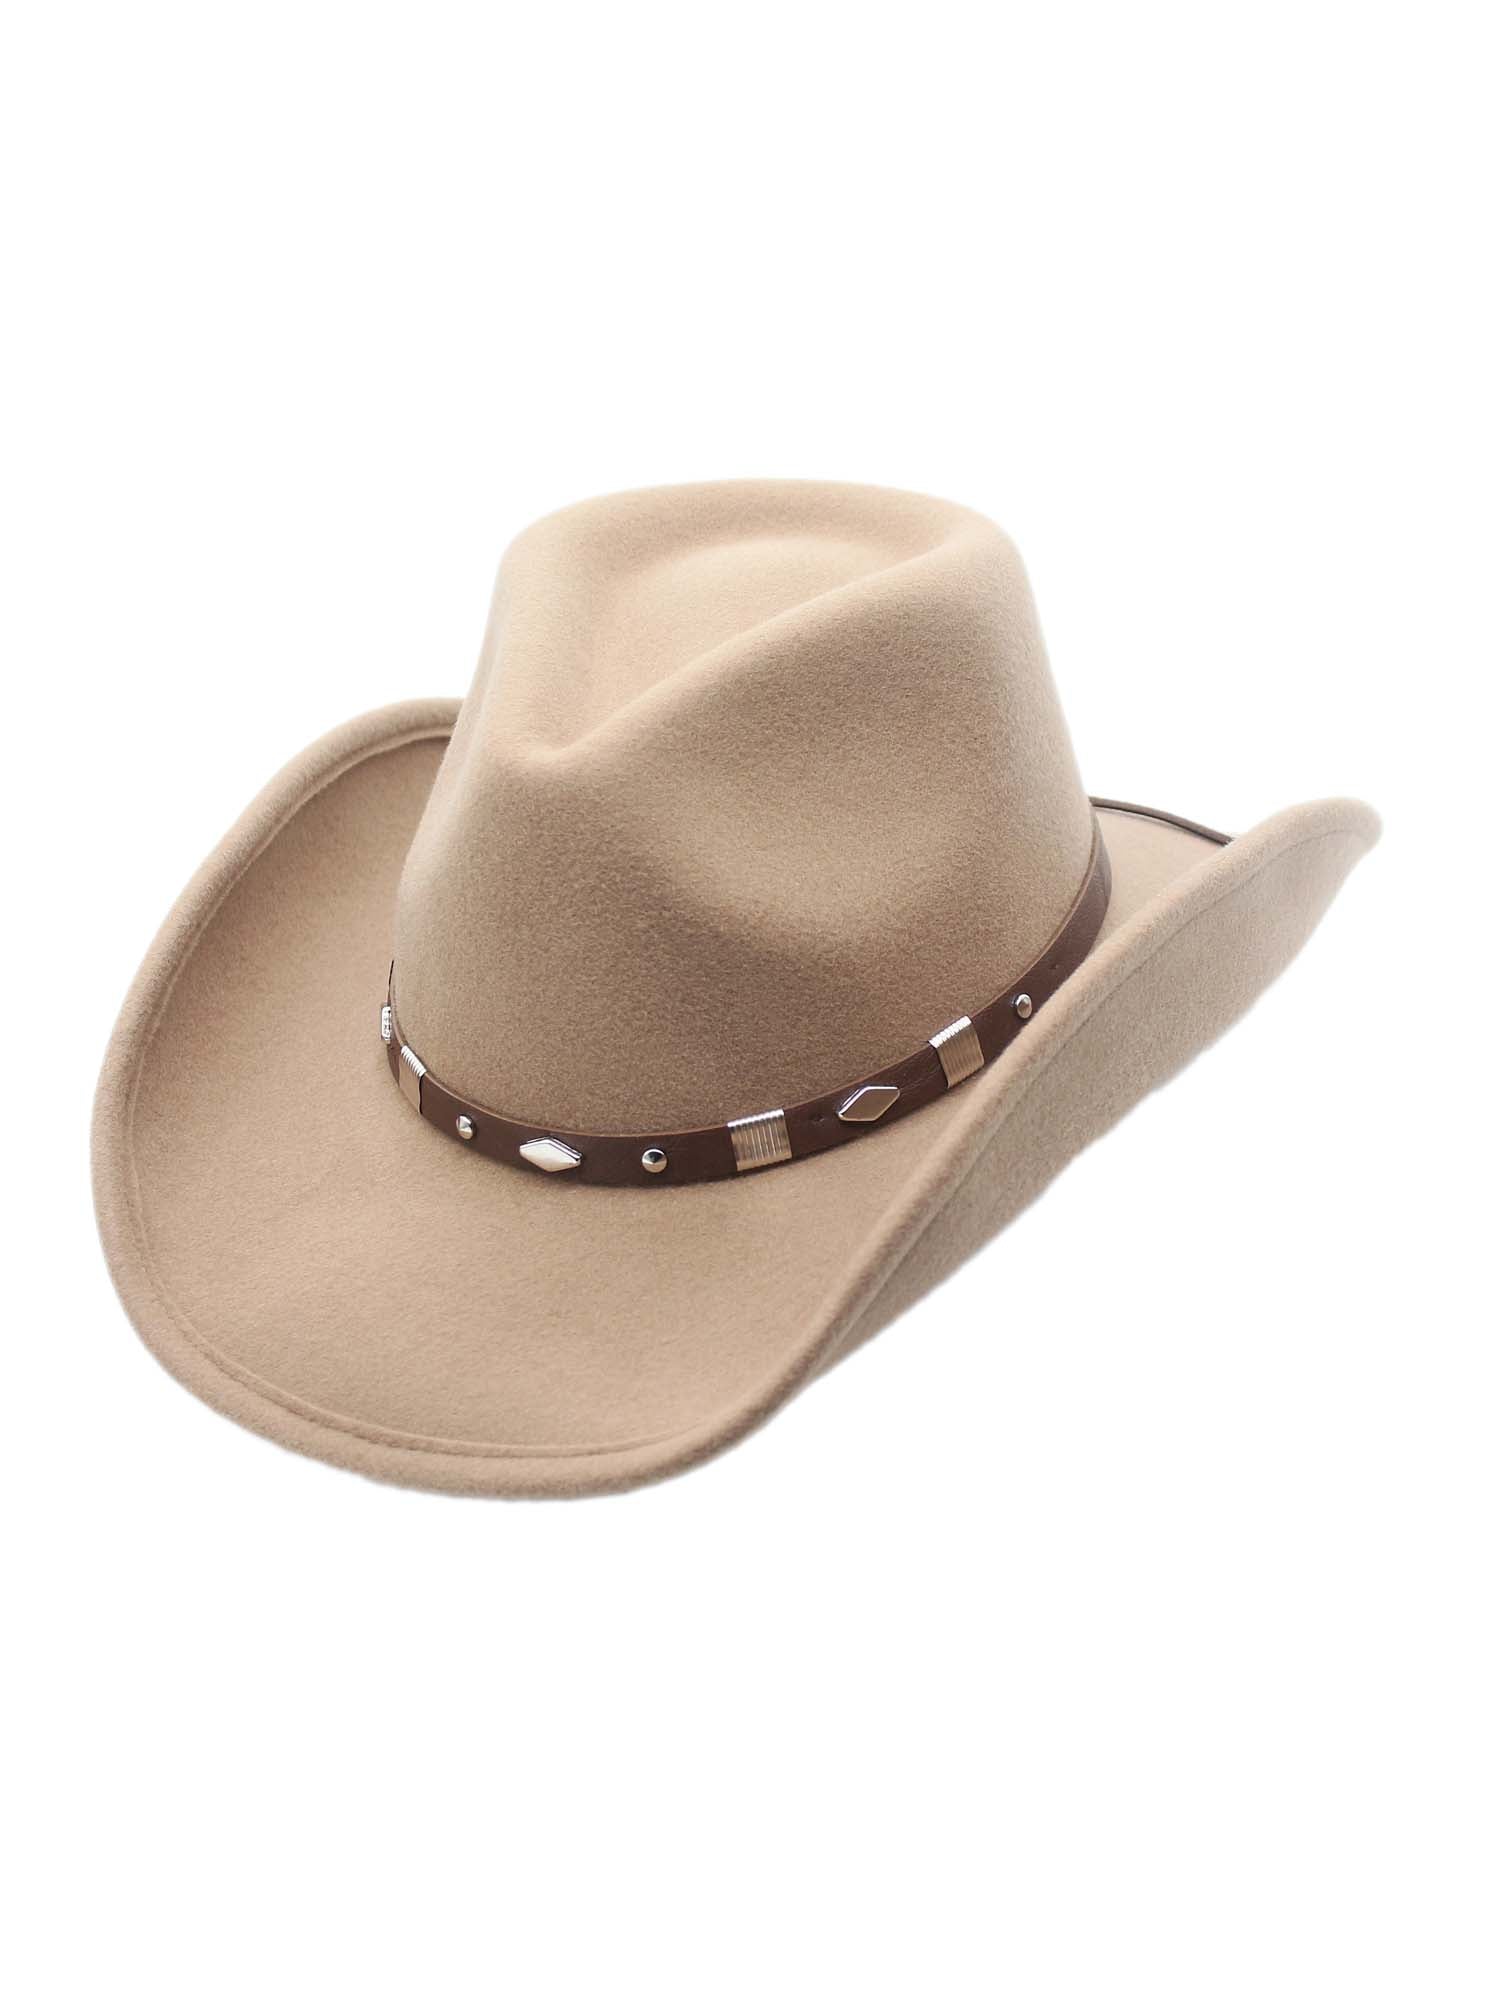 Silver Canyon Boot and Clothing Company Weathered Outback Outdoor XL Brown Hat 